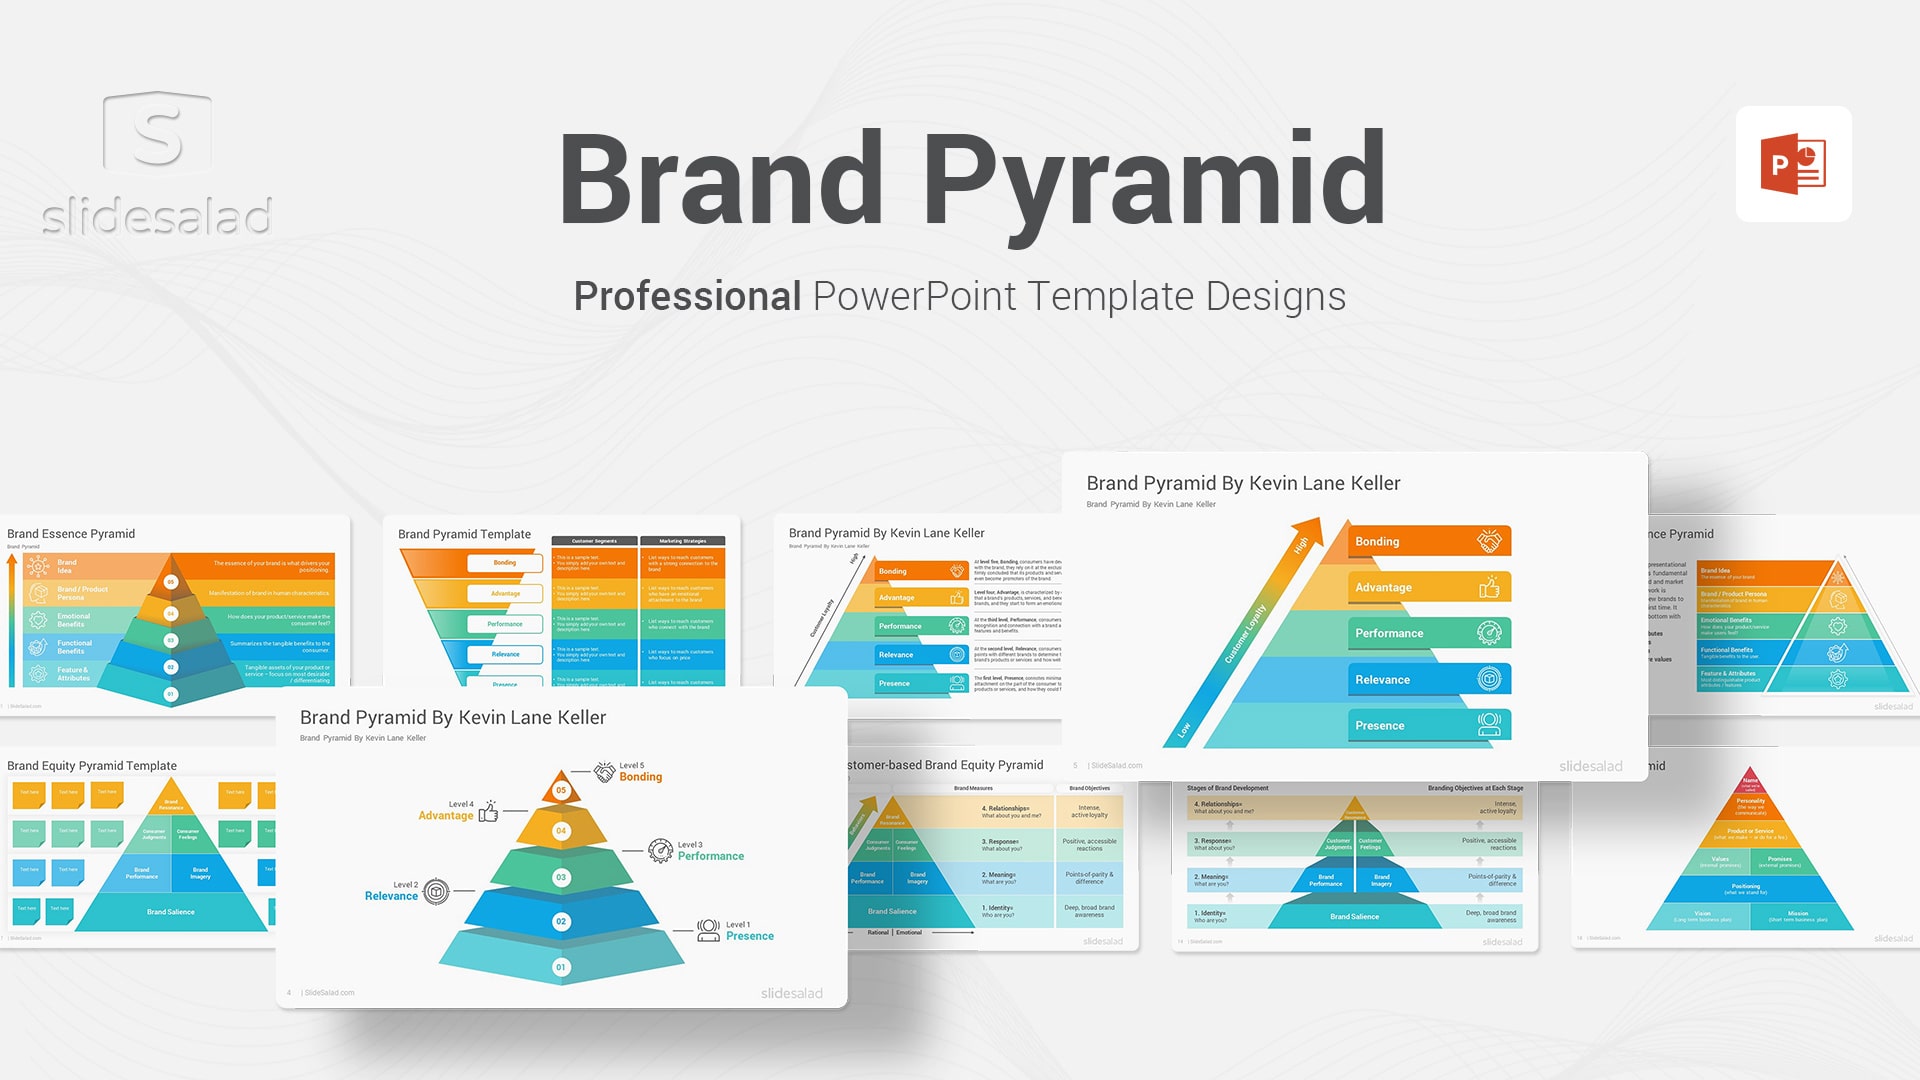 Brand Pyramid PowerPoint Template Designs - Top Quality Brand Pyramid Framework Design Layouts for Microsoft PPT Presentations